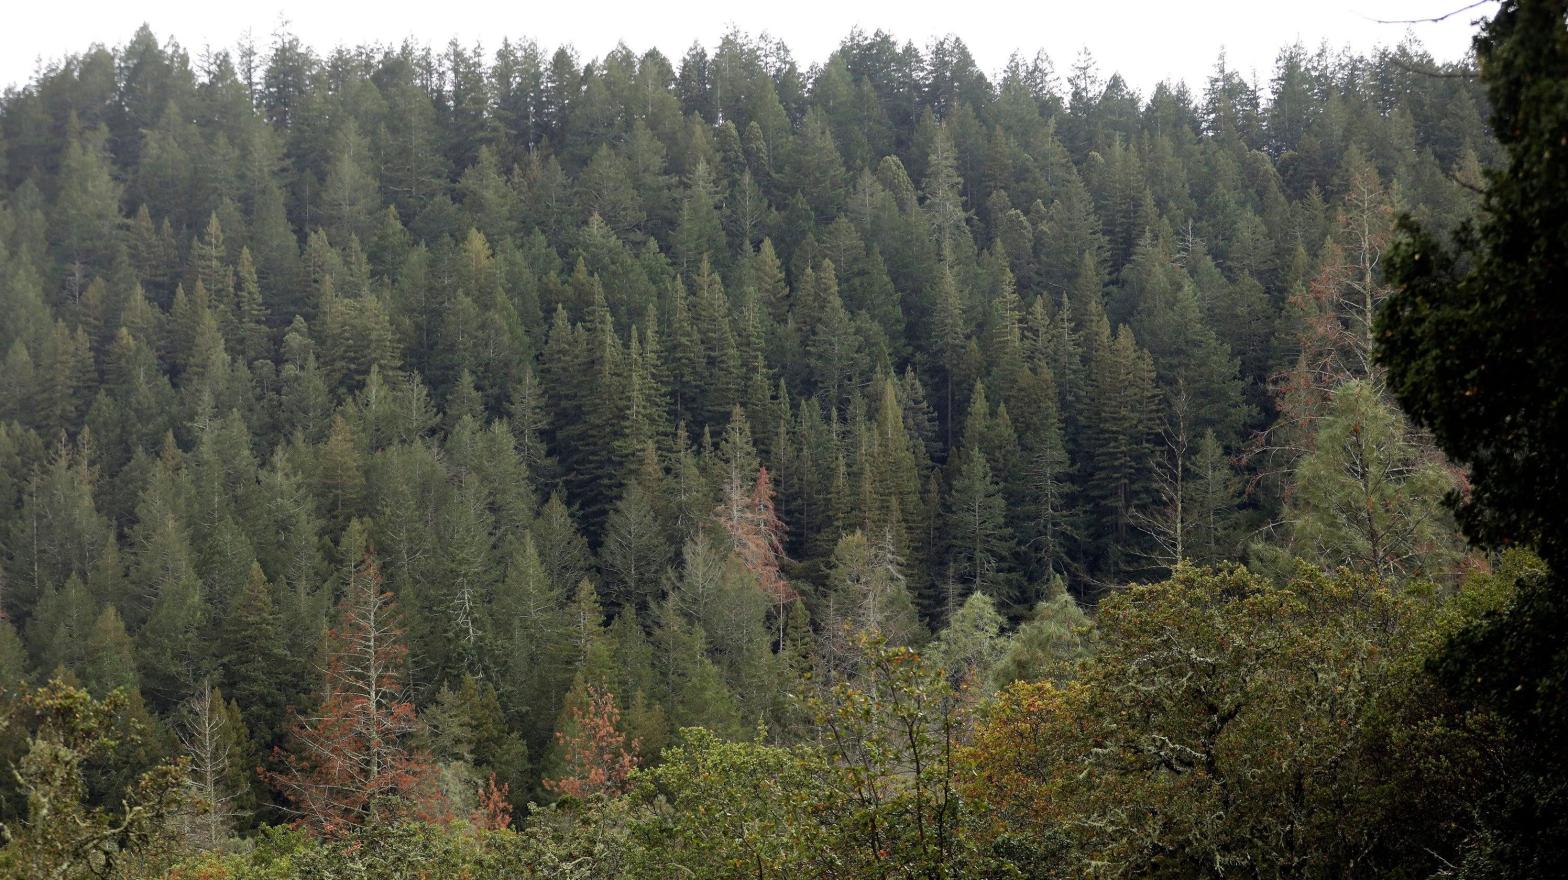 Dead and dying Ponderosa pine trees that have met their demise from bark beetles dot the landscape in Las Posadas State Forest in Angwin, Calif., on Tuesday, Sept. 20, 2022.  (Photo: Scott Strazzante/San Francisco Chronicle, AP)